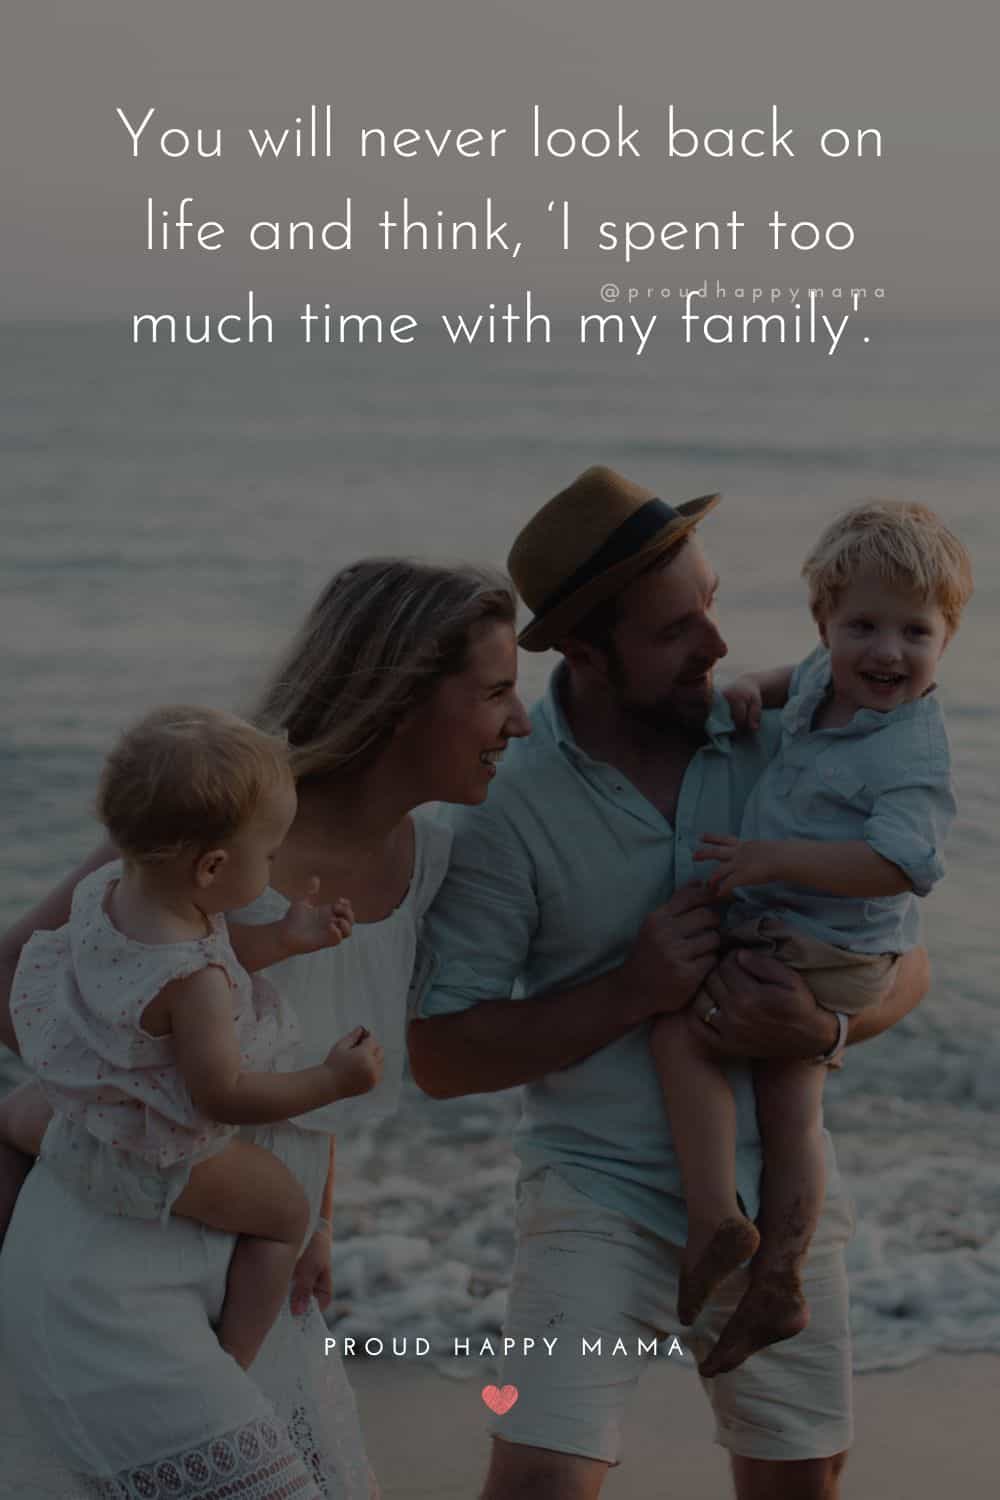 time with family quotes - You will never look back on life and think, ‘I spent too much time with my family'.